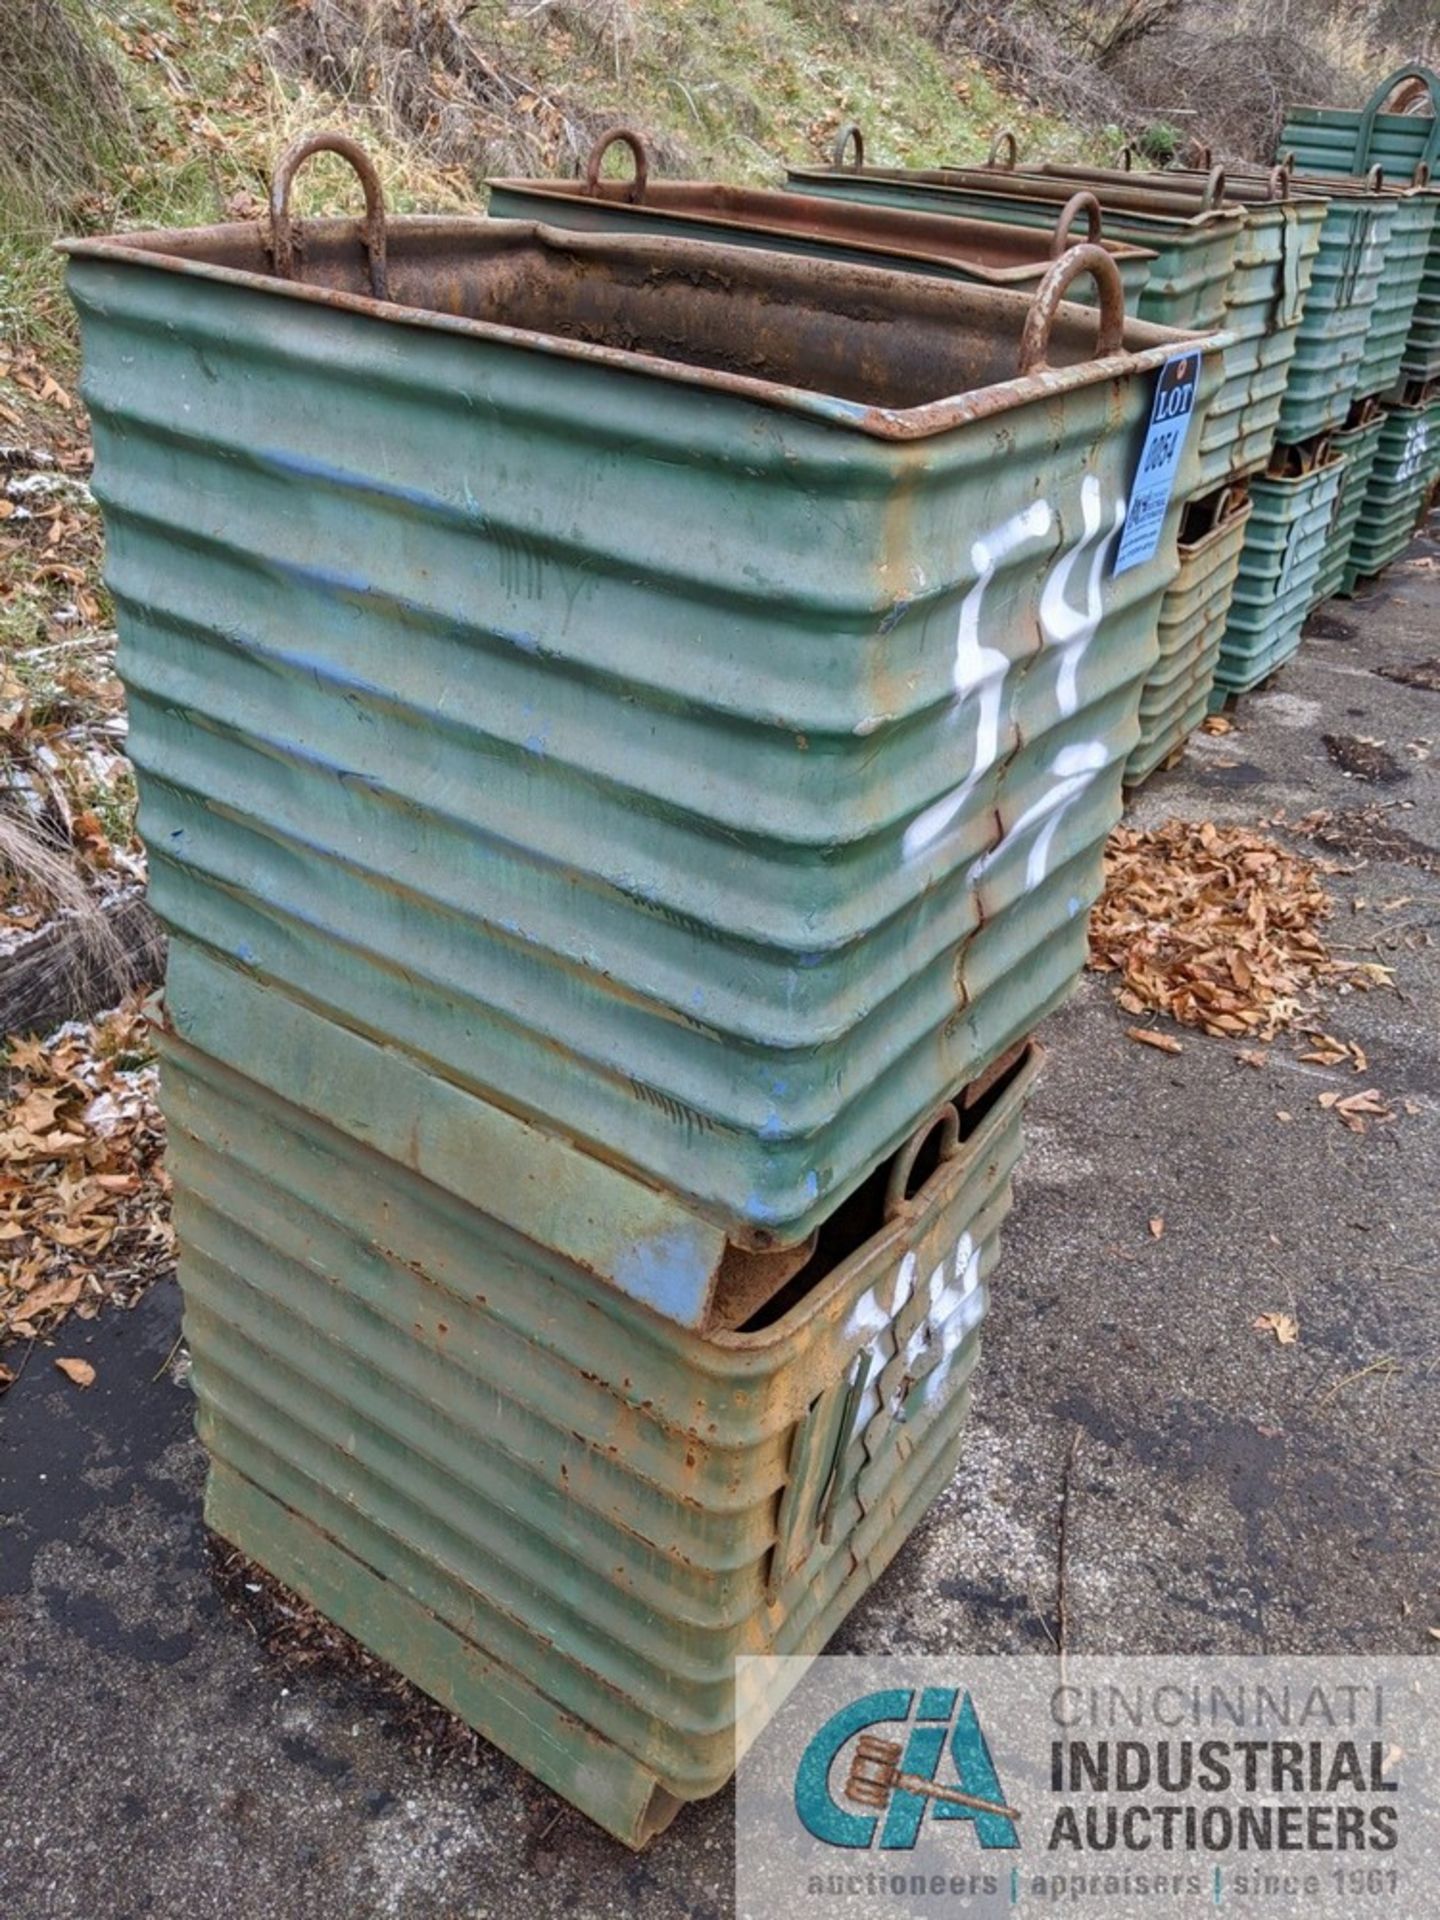 22" X 27" X 24" DEEP STEEL CORRUGATED STACKING TUBS **DELAYED REMOVAL UNTIL 12/20/2021** - Image 2 of 3